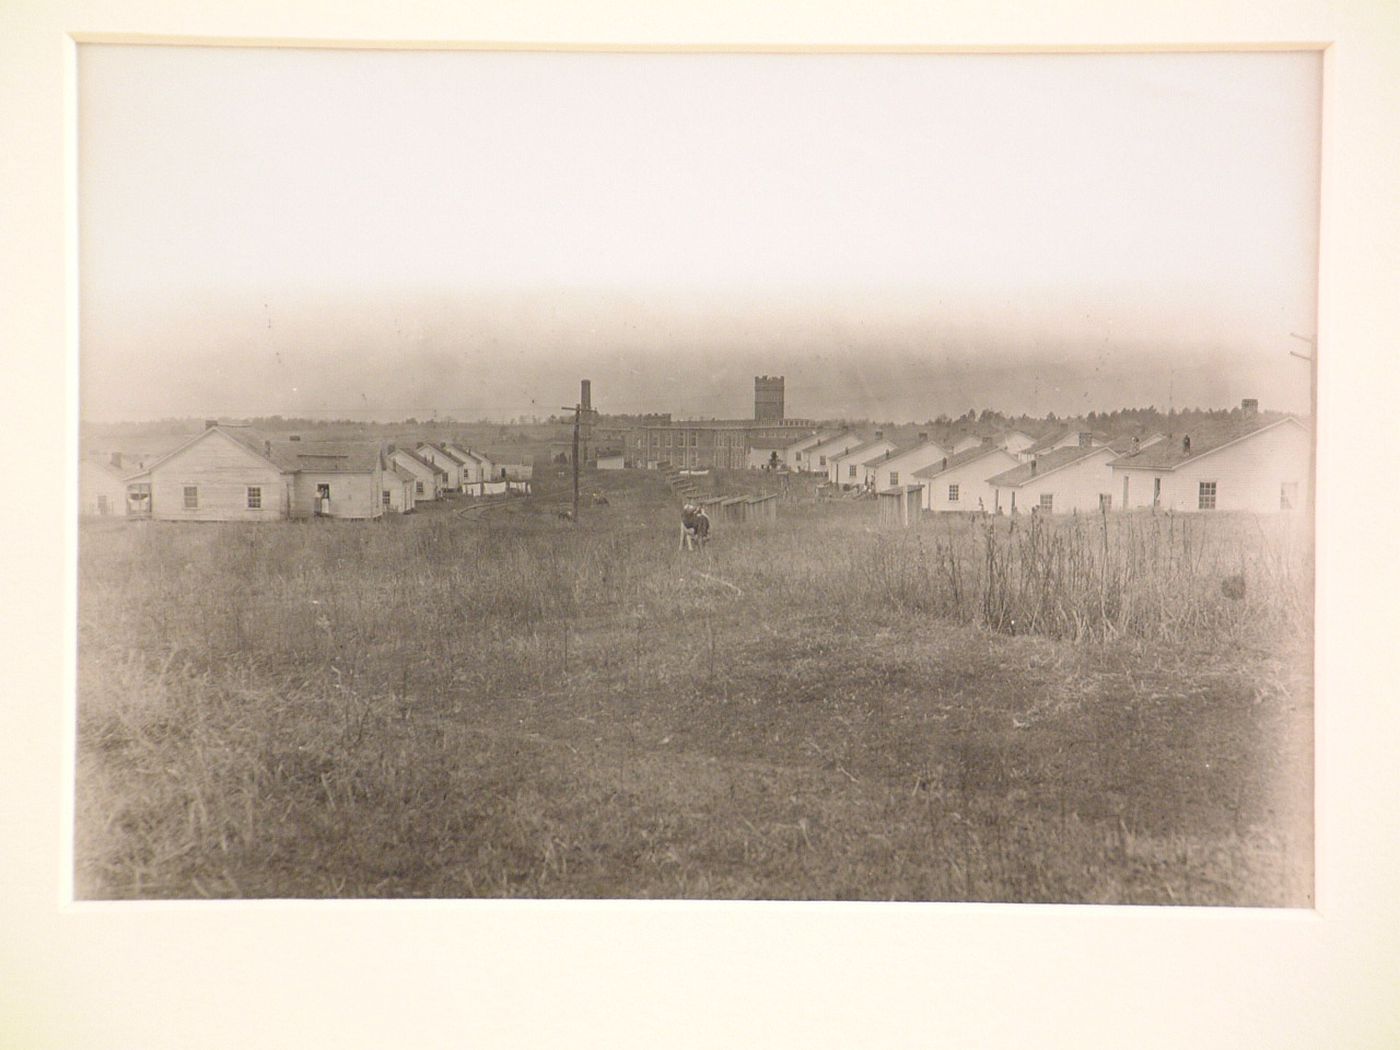 View of settlement with houses and outhouses in front of Wylie Mill, Chester, South Carolina, United States